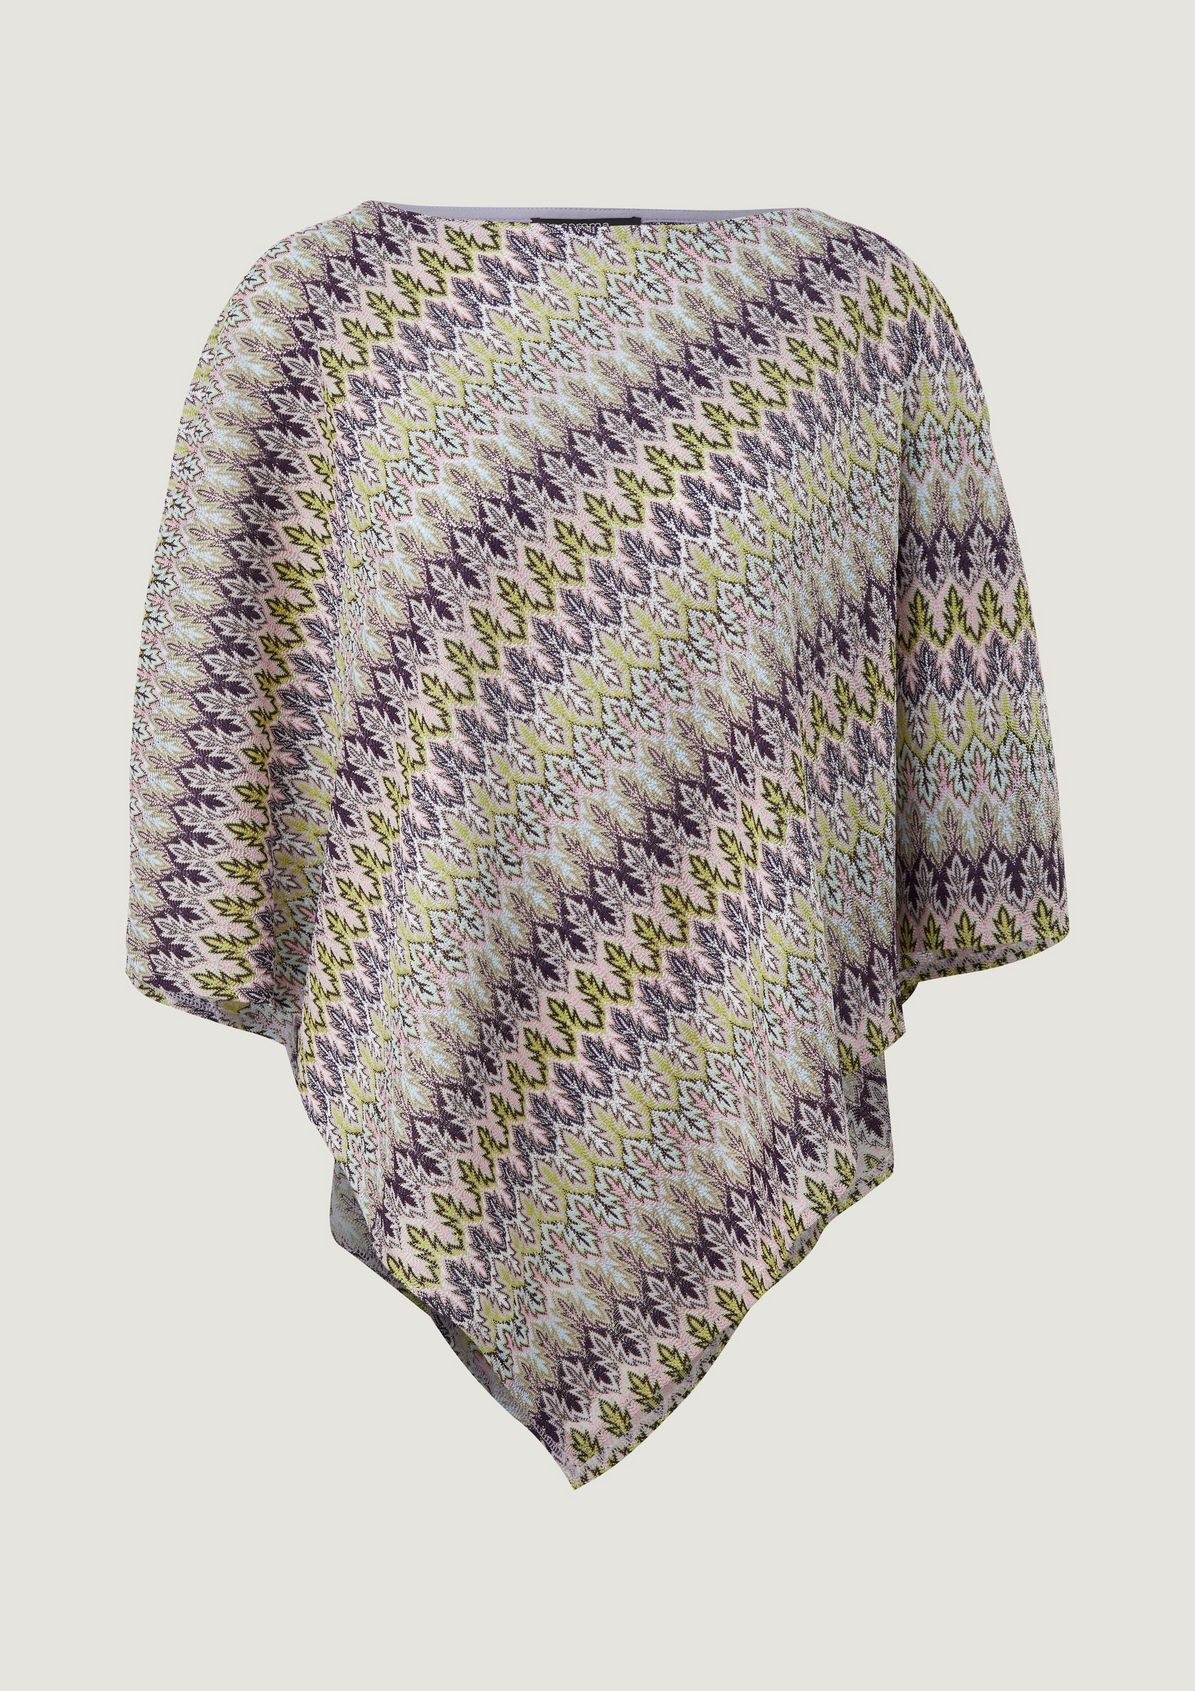 Poncho made of patterned knit from comma